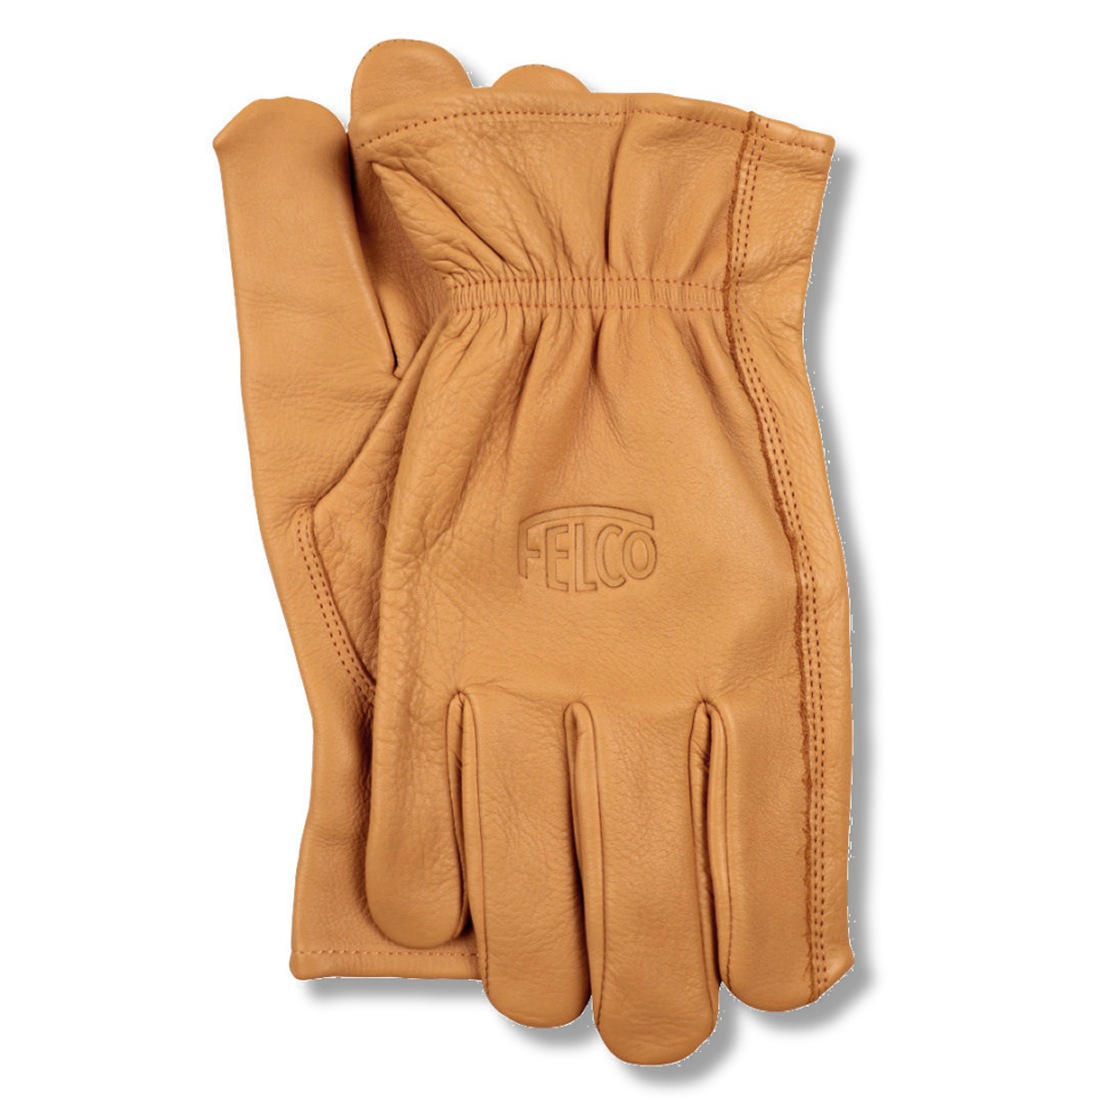 Genuine Felco Gloves 703 - SMALL - Premium full leather with elasticated cuff - official Felco stockist